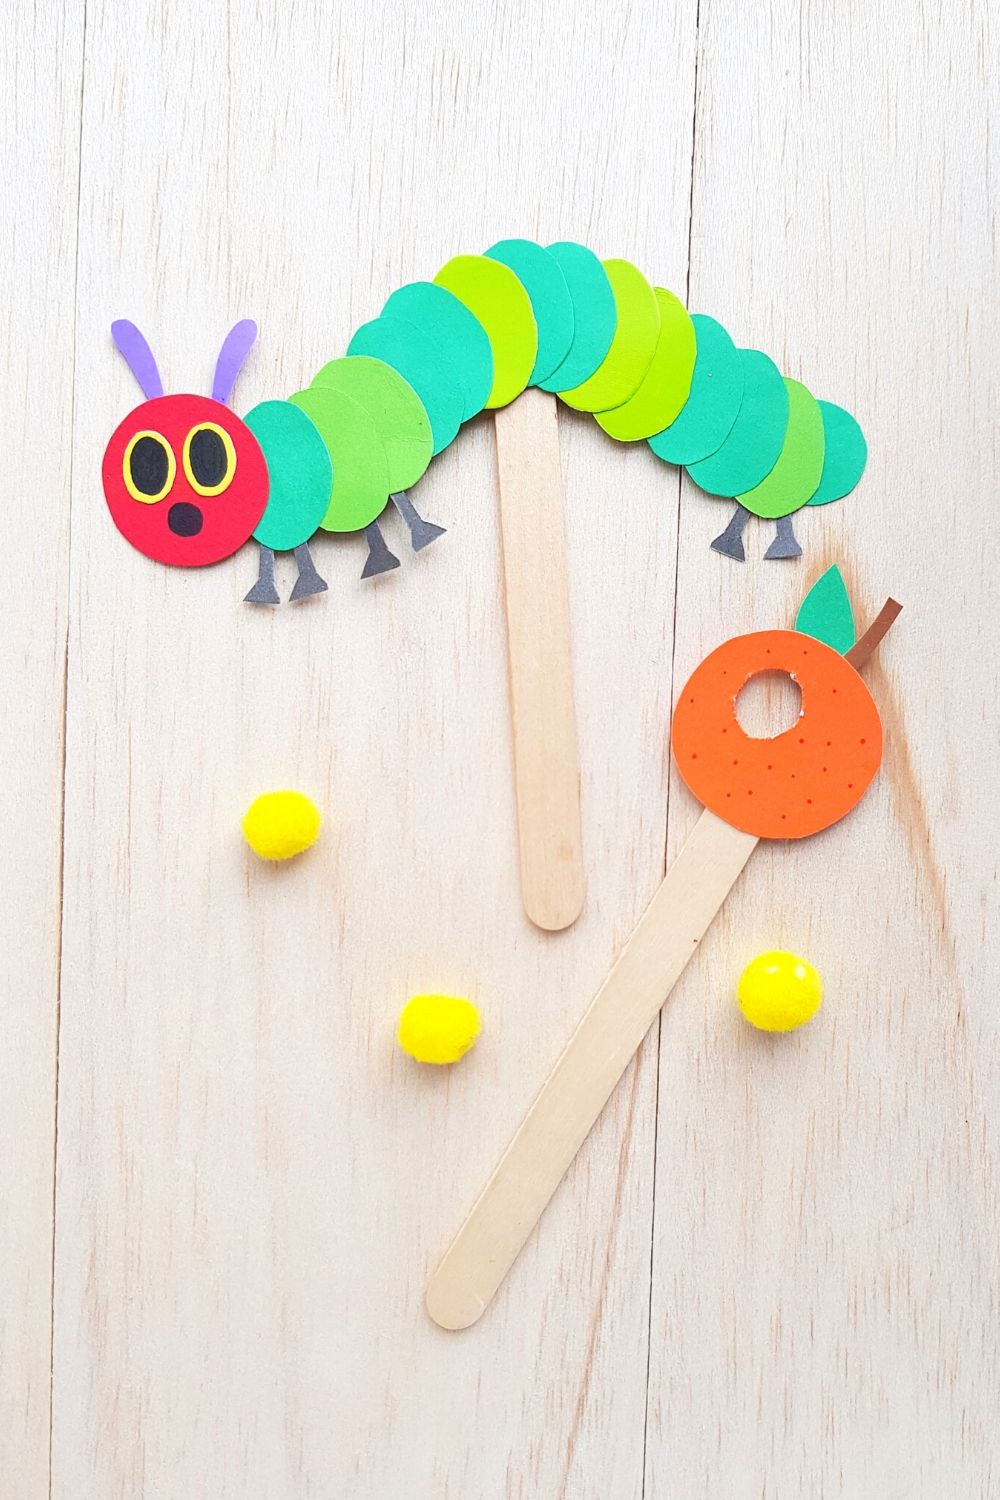 Did you read The Very Hungry Caterpillar? This Very Hungry Caterpillar Puppet Craft is a fun preschool kids craft to accompany the popular children's book. Add this easy Very Hungry Caterpillar craft for kids to your school lesson plans, homeschool plan or make with your kids. This is a great craft to accompany your life and plant cycle curriculum. Download this free Very Hungry Caterpillar Puppet craft template today for your students or kids.